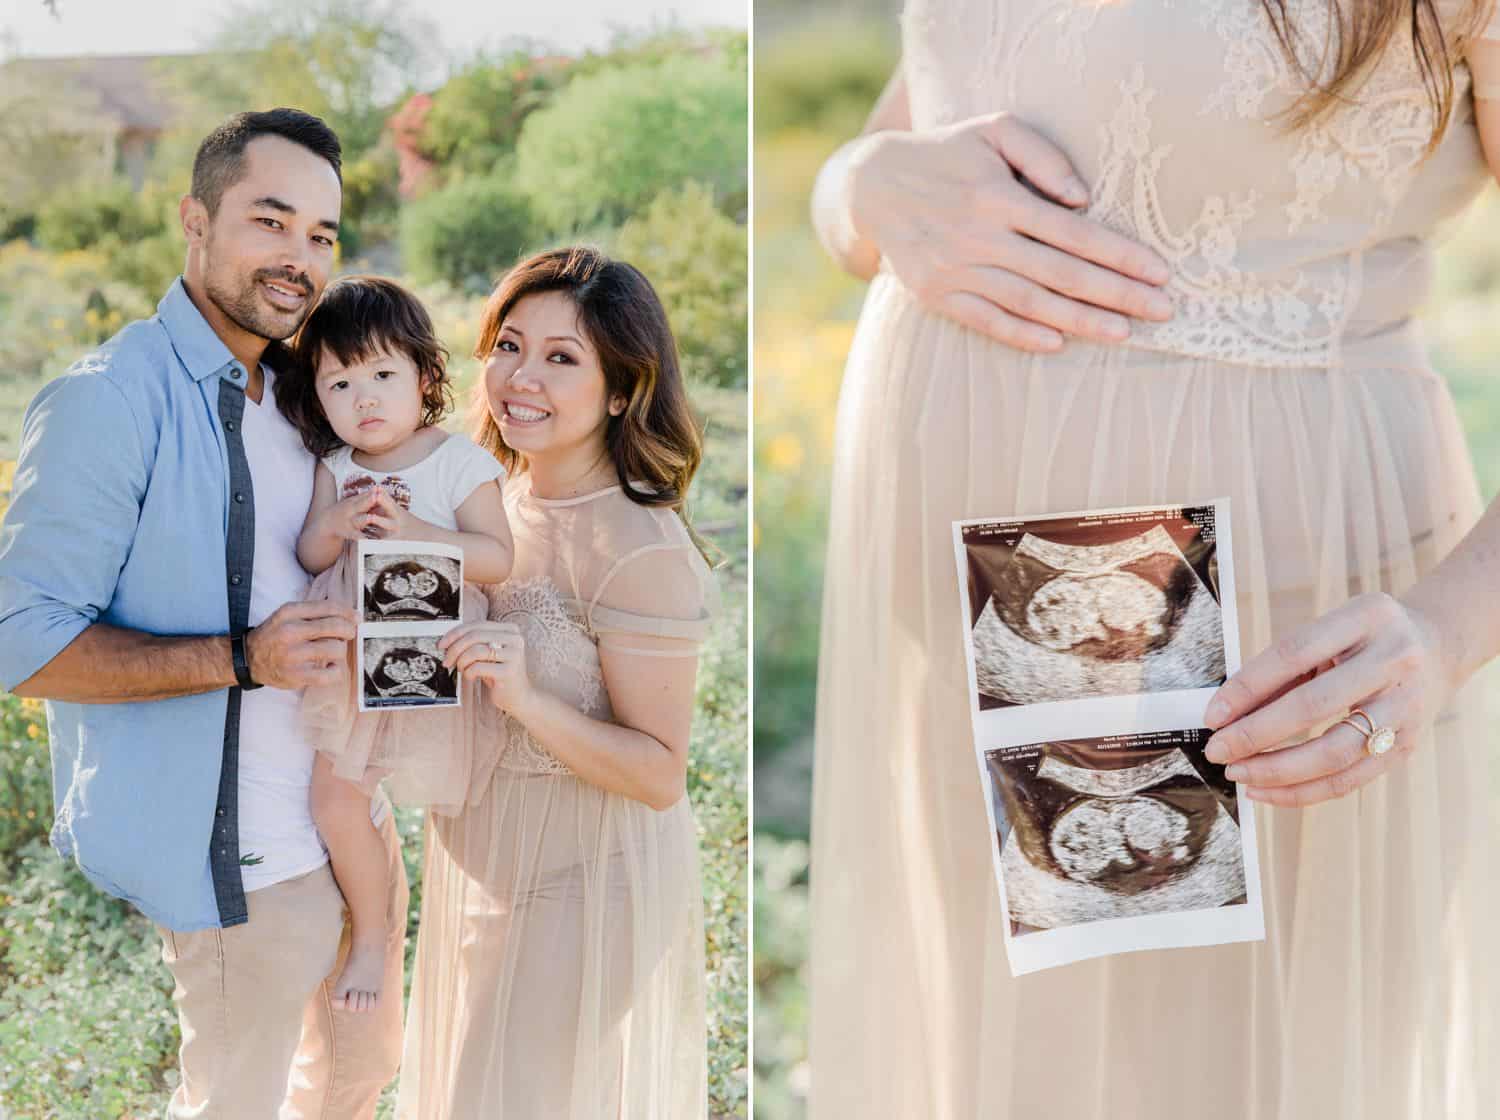 Two parents stand with their young daughter displaying two sonogram photographs